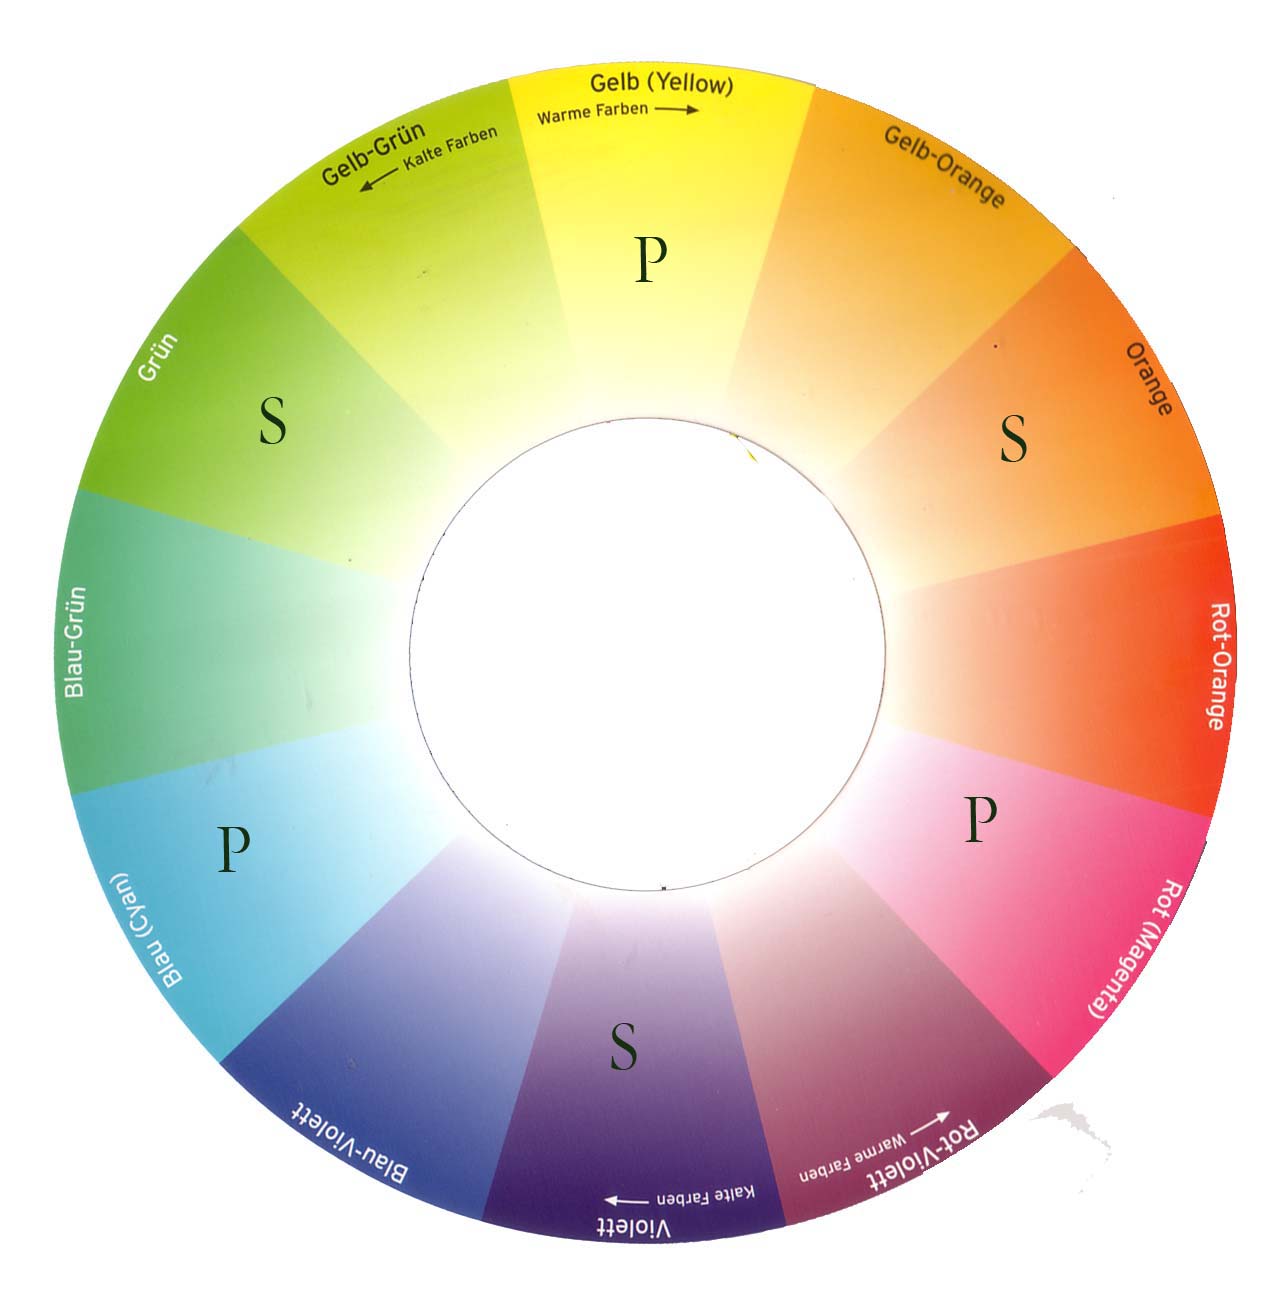 primary secondary color wheel